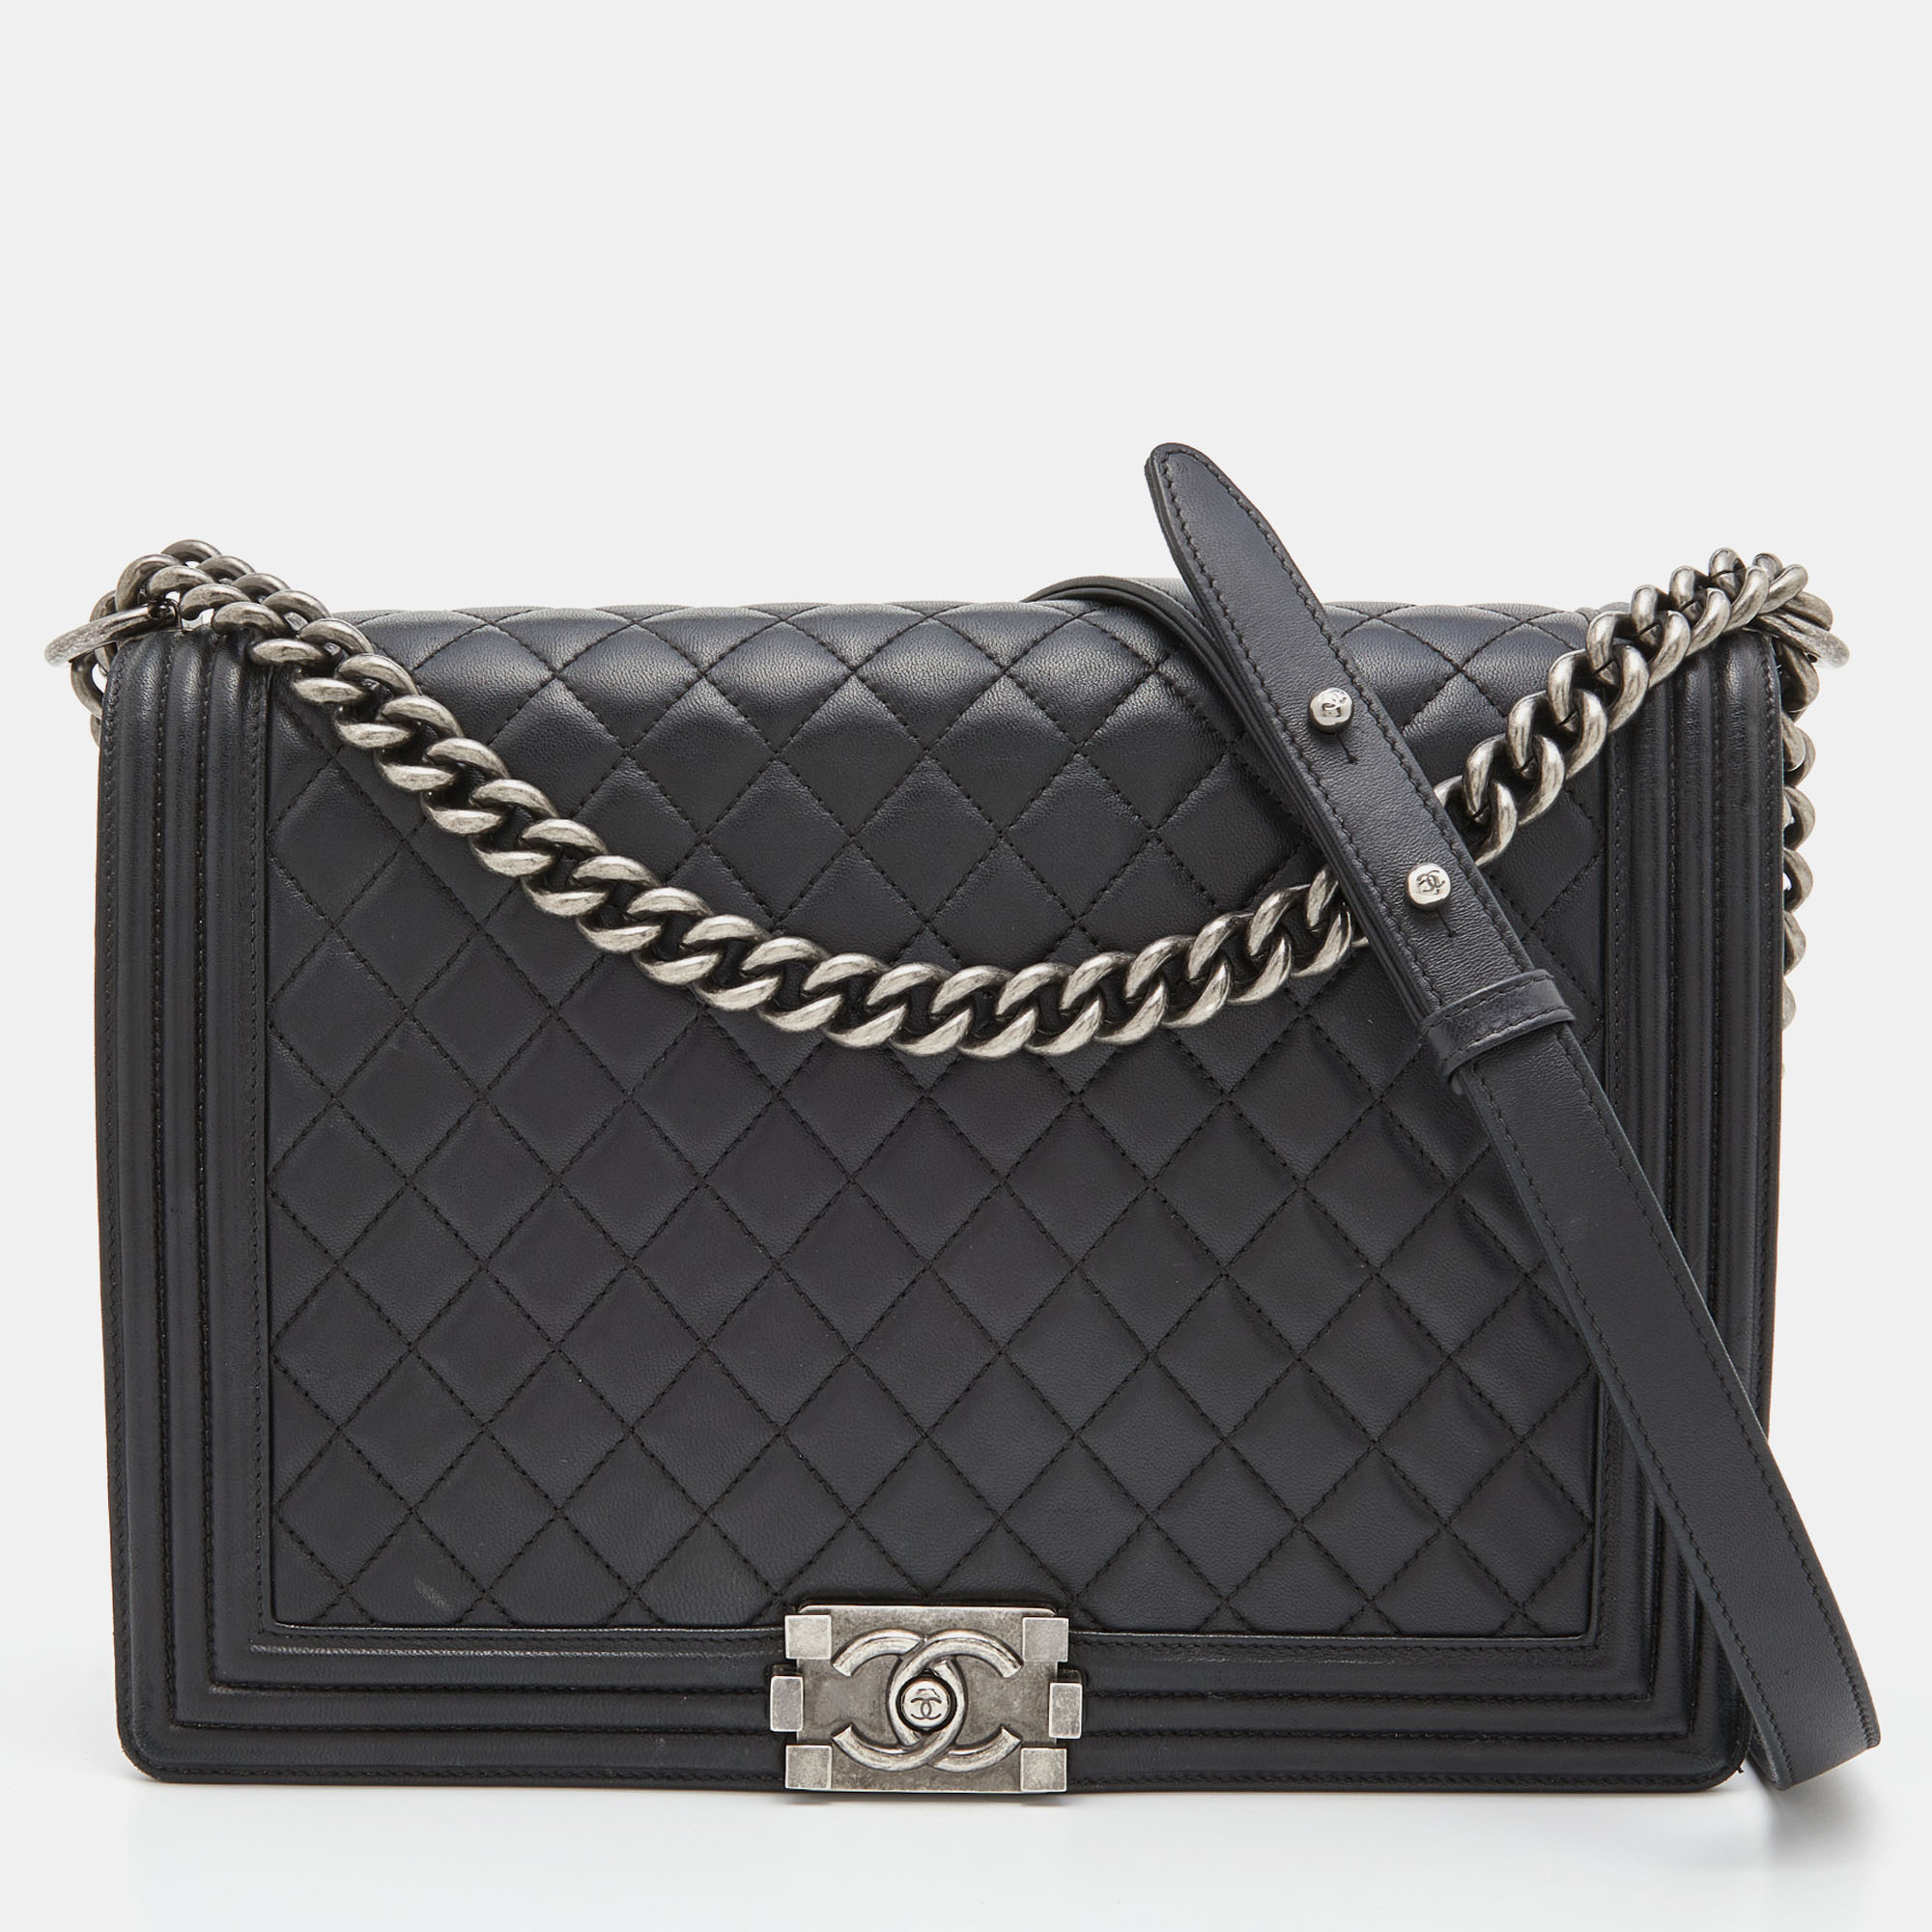 Pre-owned Chanel Black Quilted Leather Large Boy Flap Bag